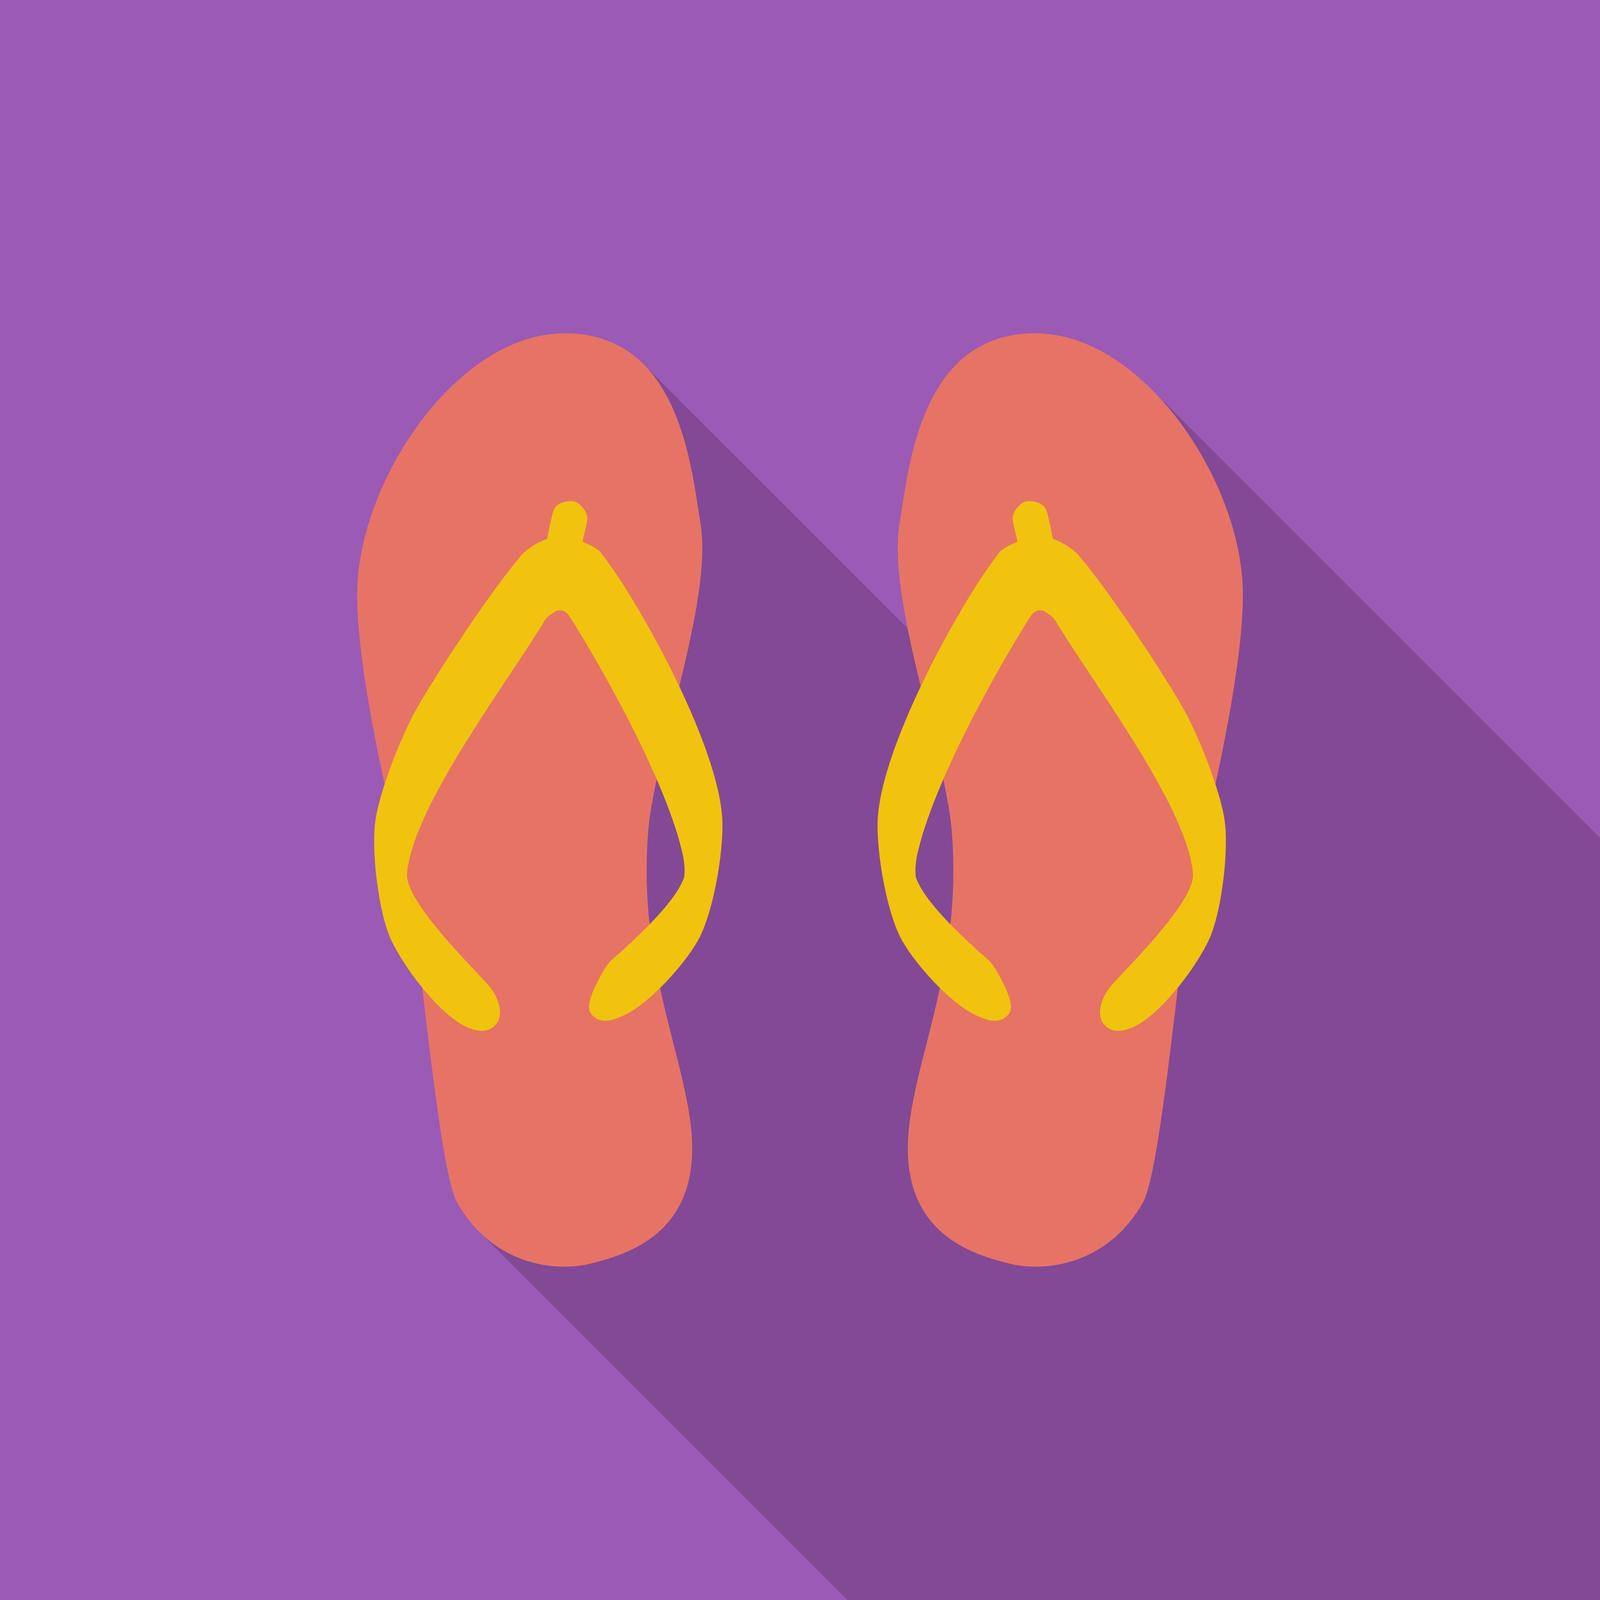 Beach slippers icon. Flat vector related icon with long shadow for web and mobile applications. It can be used as - logo, pictogram, icon, infographic element. Vector Illustration.